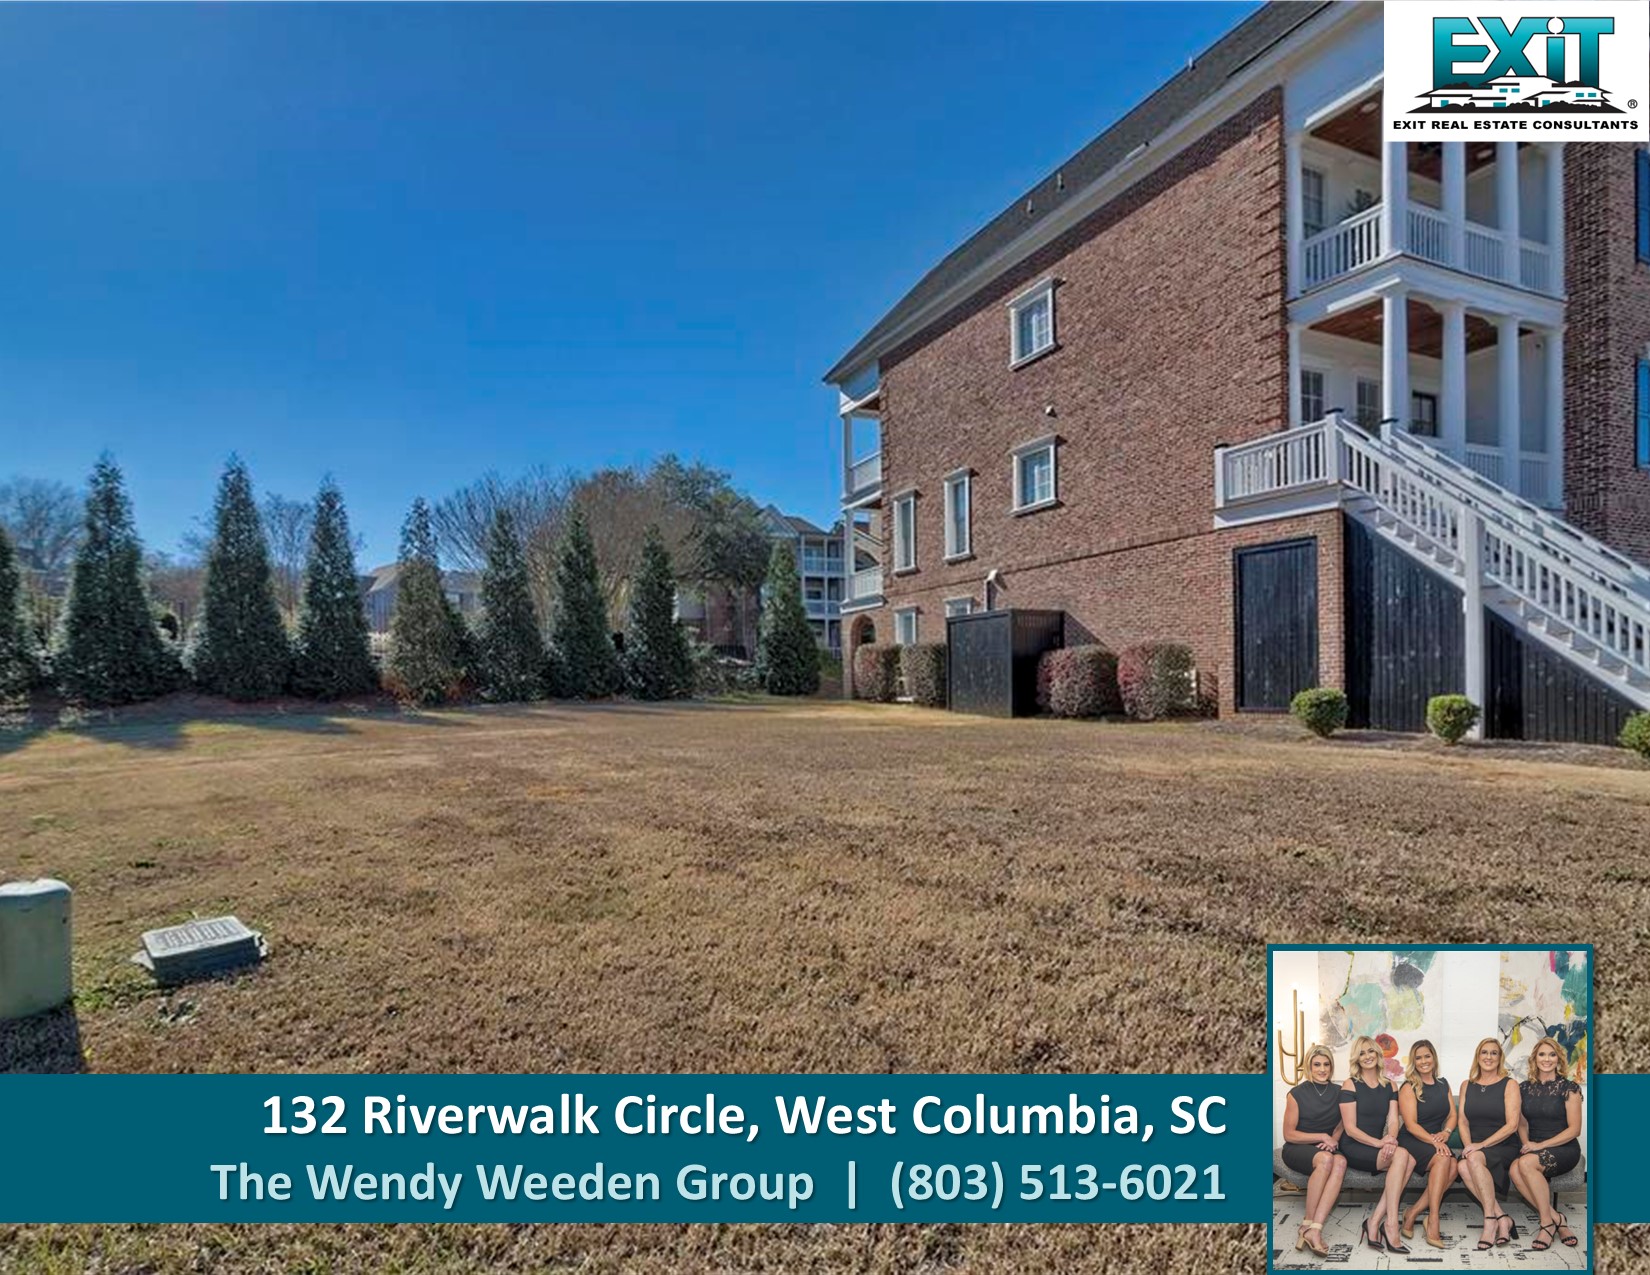 Just listed in the Village at Riverwalk - West Columbia